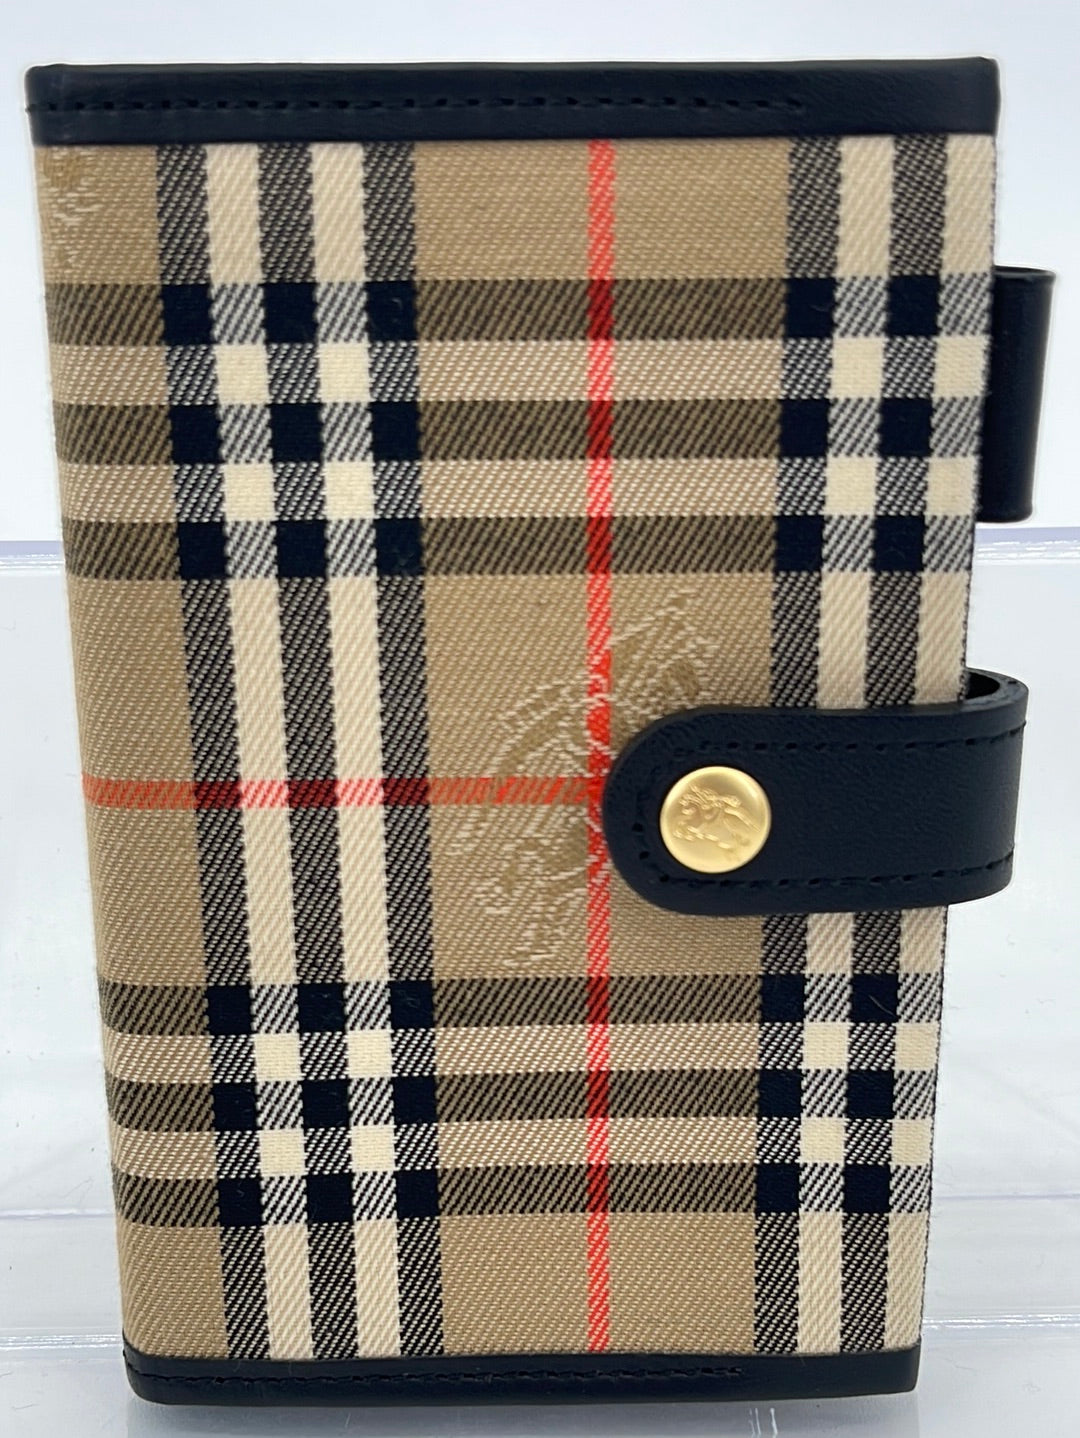 Authentic Burberry Wallet  Burberry wallet, Leather checkbook wallet,  Wallet